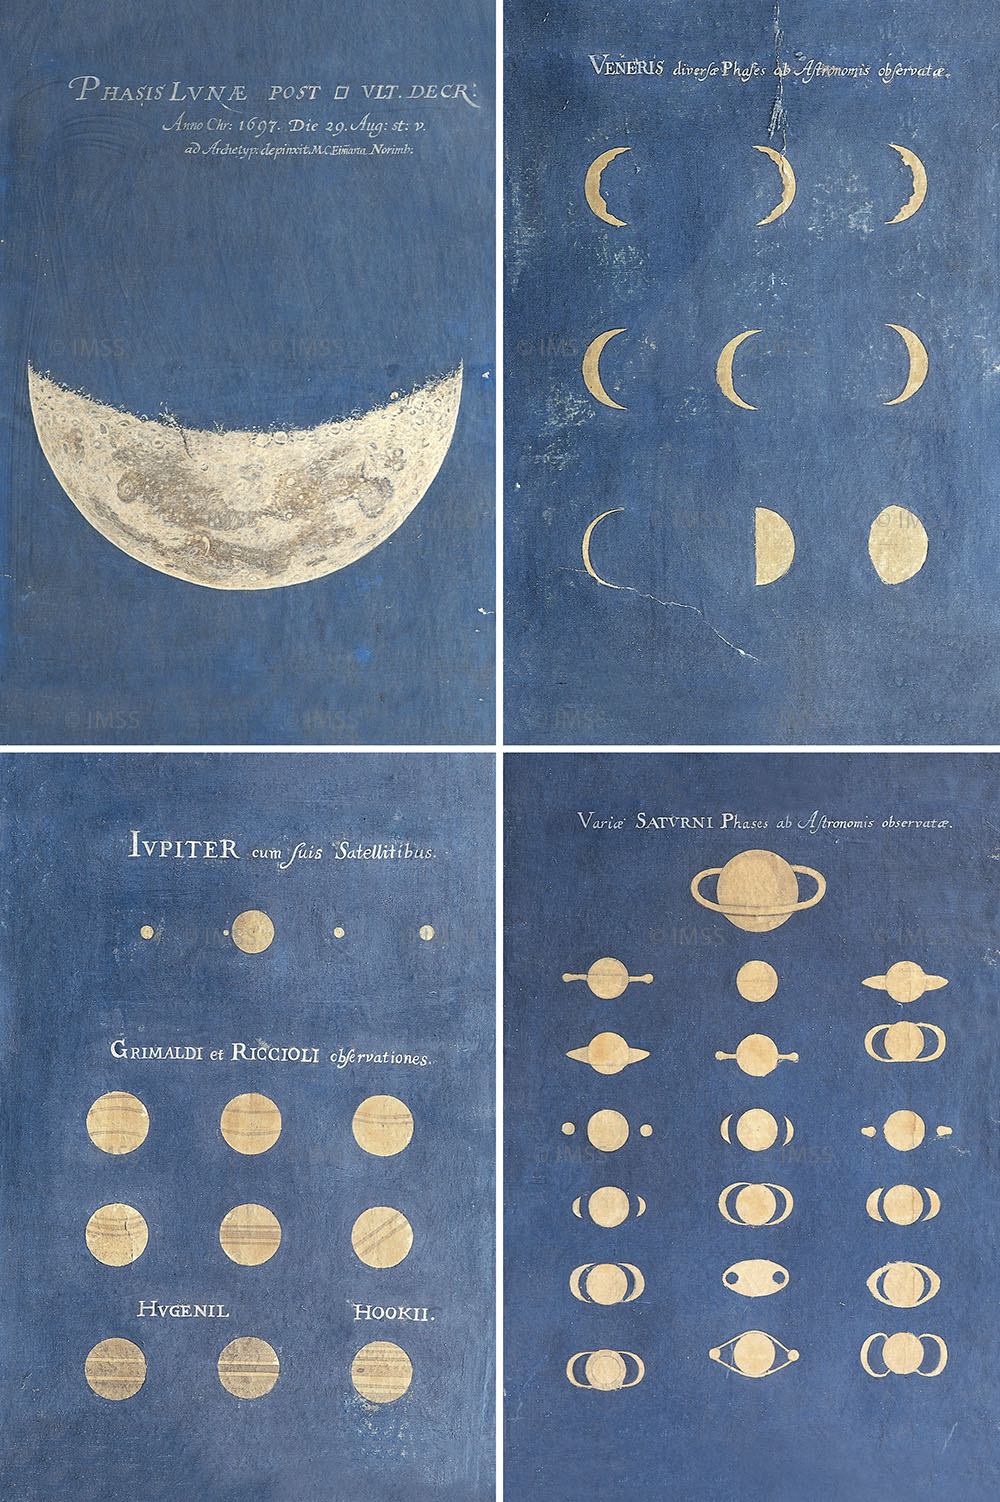 Maria Clara Eimmart, Phase of the Moon, Phases of Venus, Aspect of Jupiter, Aspect of Saturn